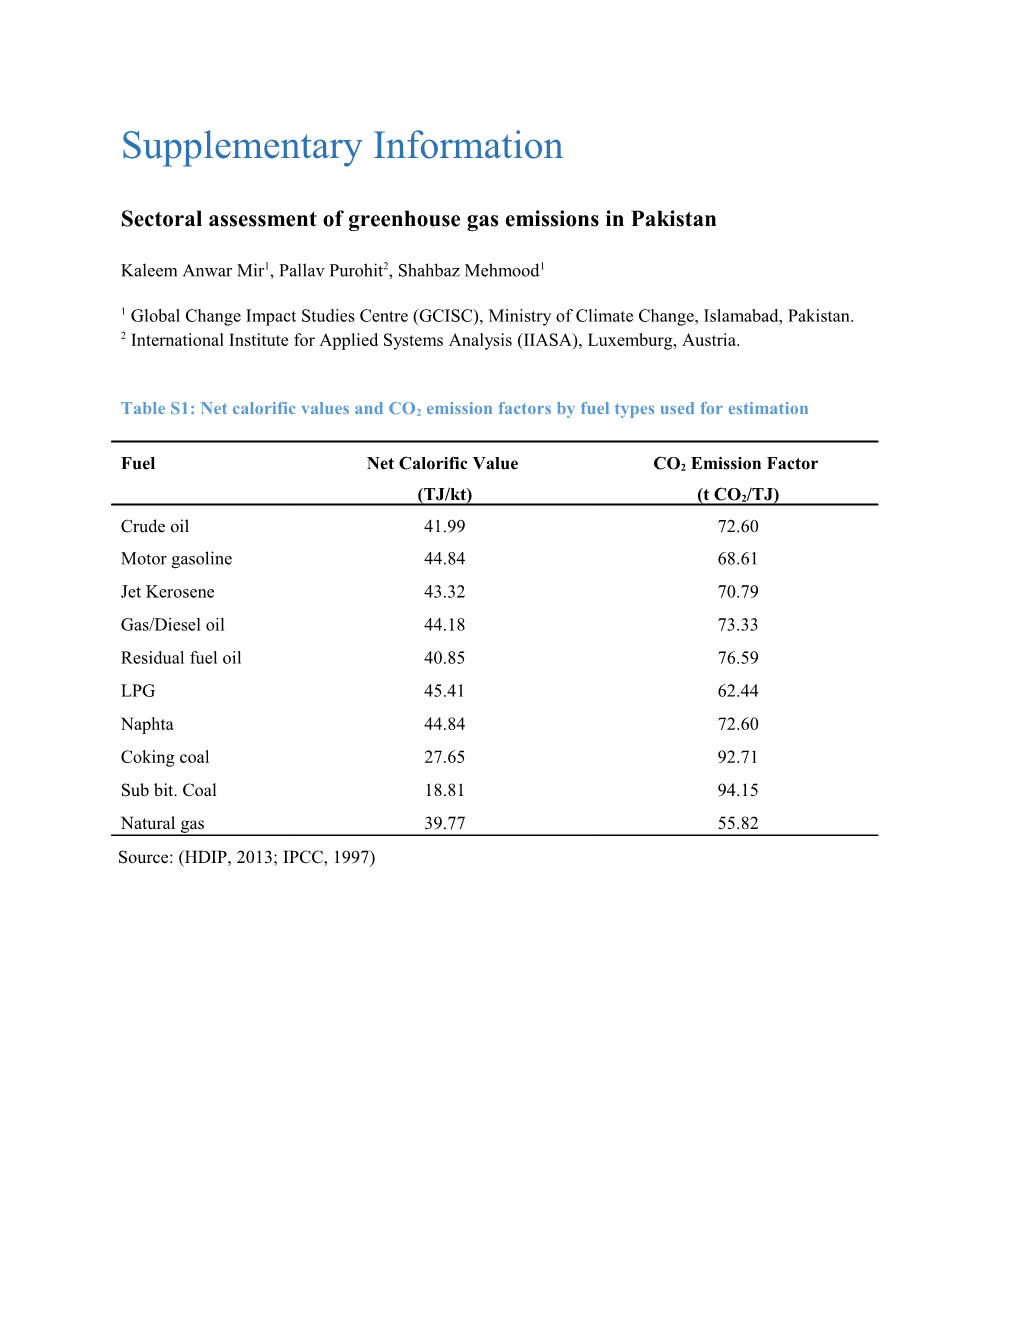 Sectoral Assessment of Greenhouse Gas Emissionsin Pakistan